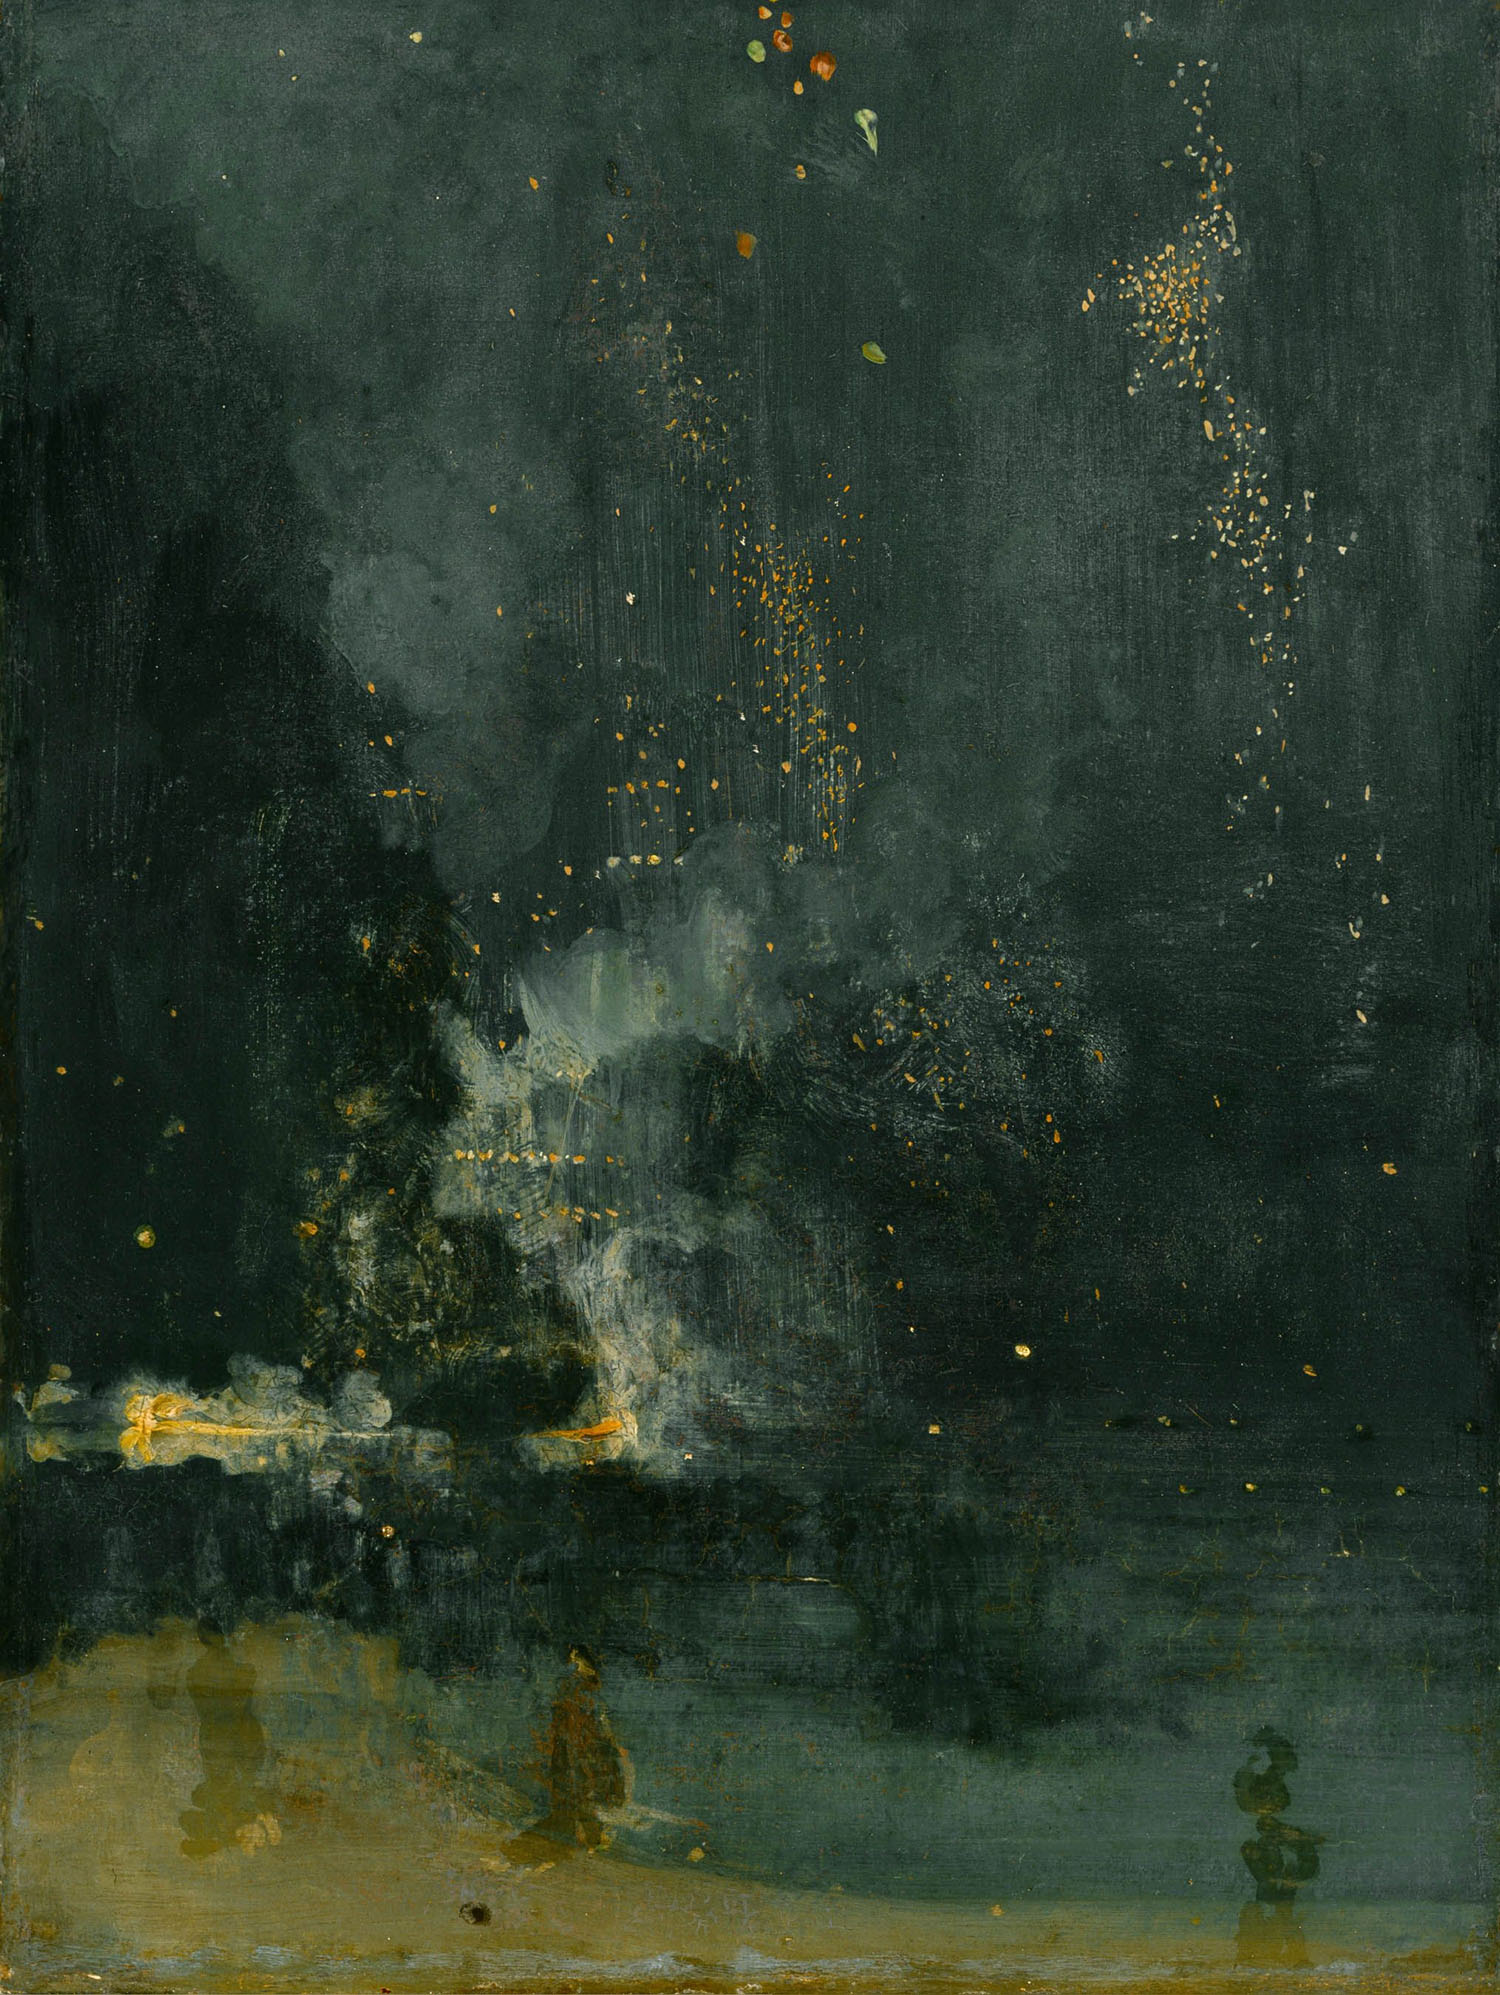 medium-roberson-atelier-fontaines-whistler-nocturne-in-black-and-gold.jpg